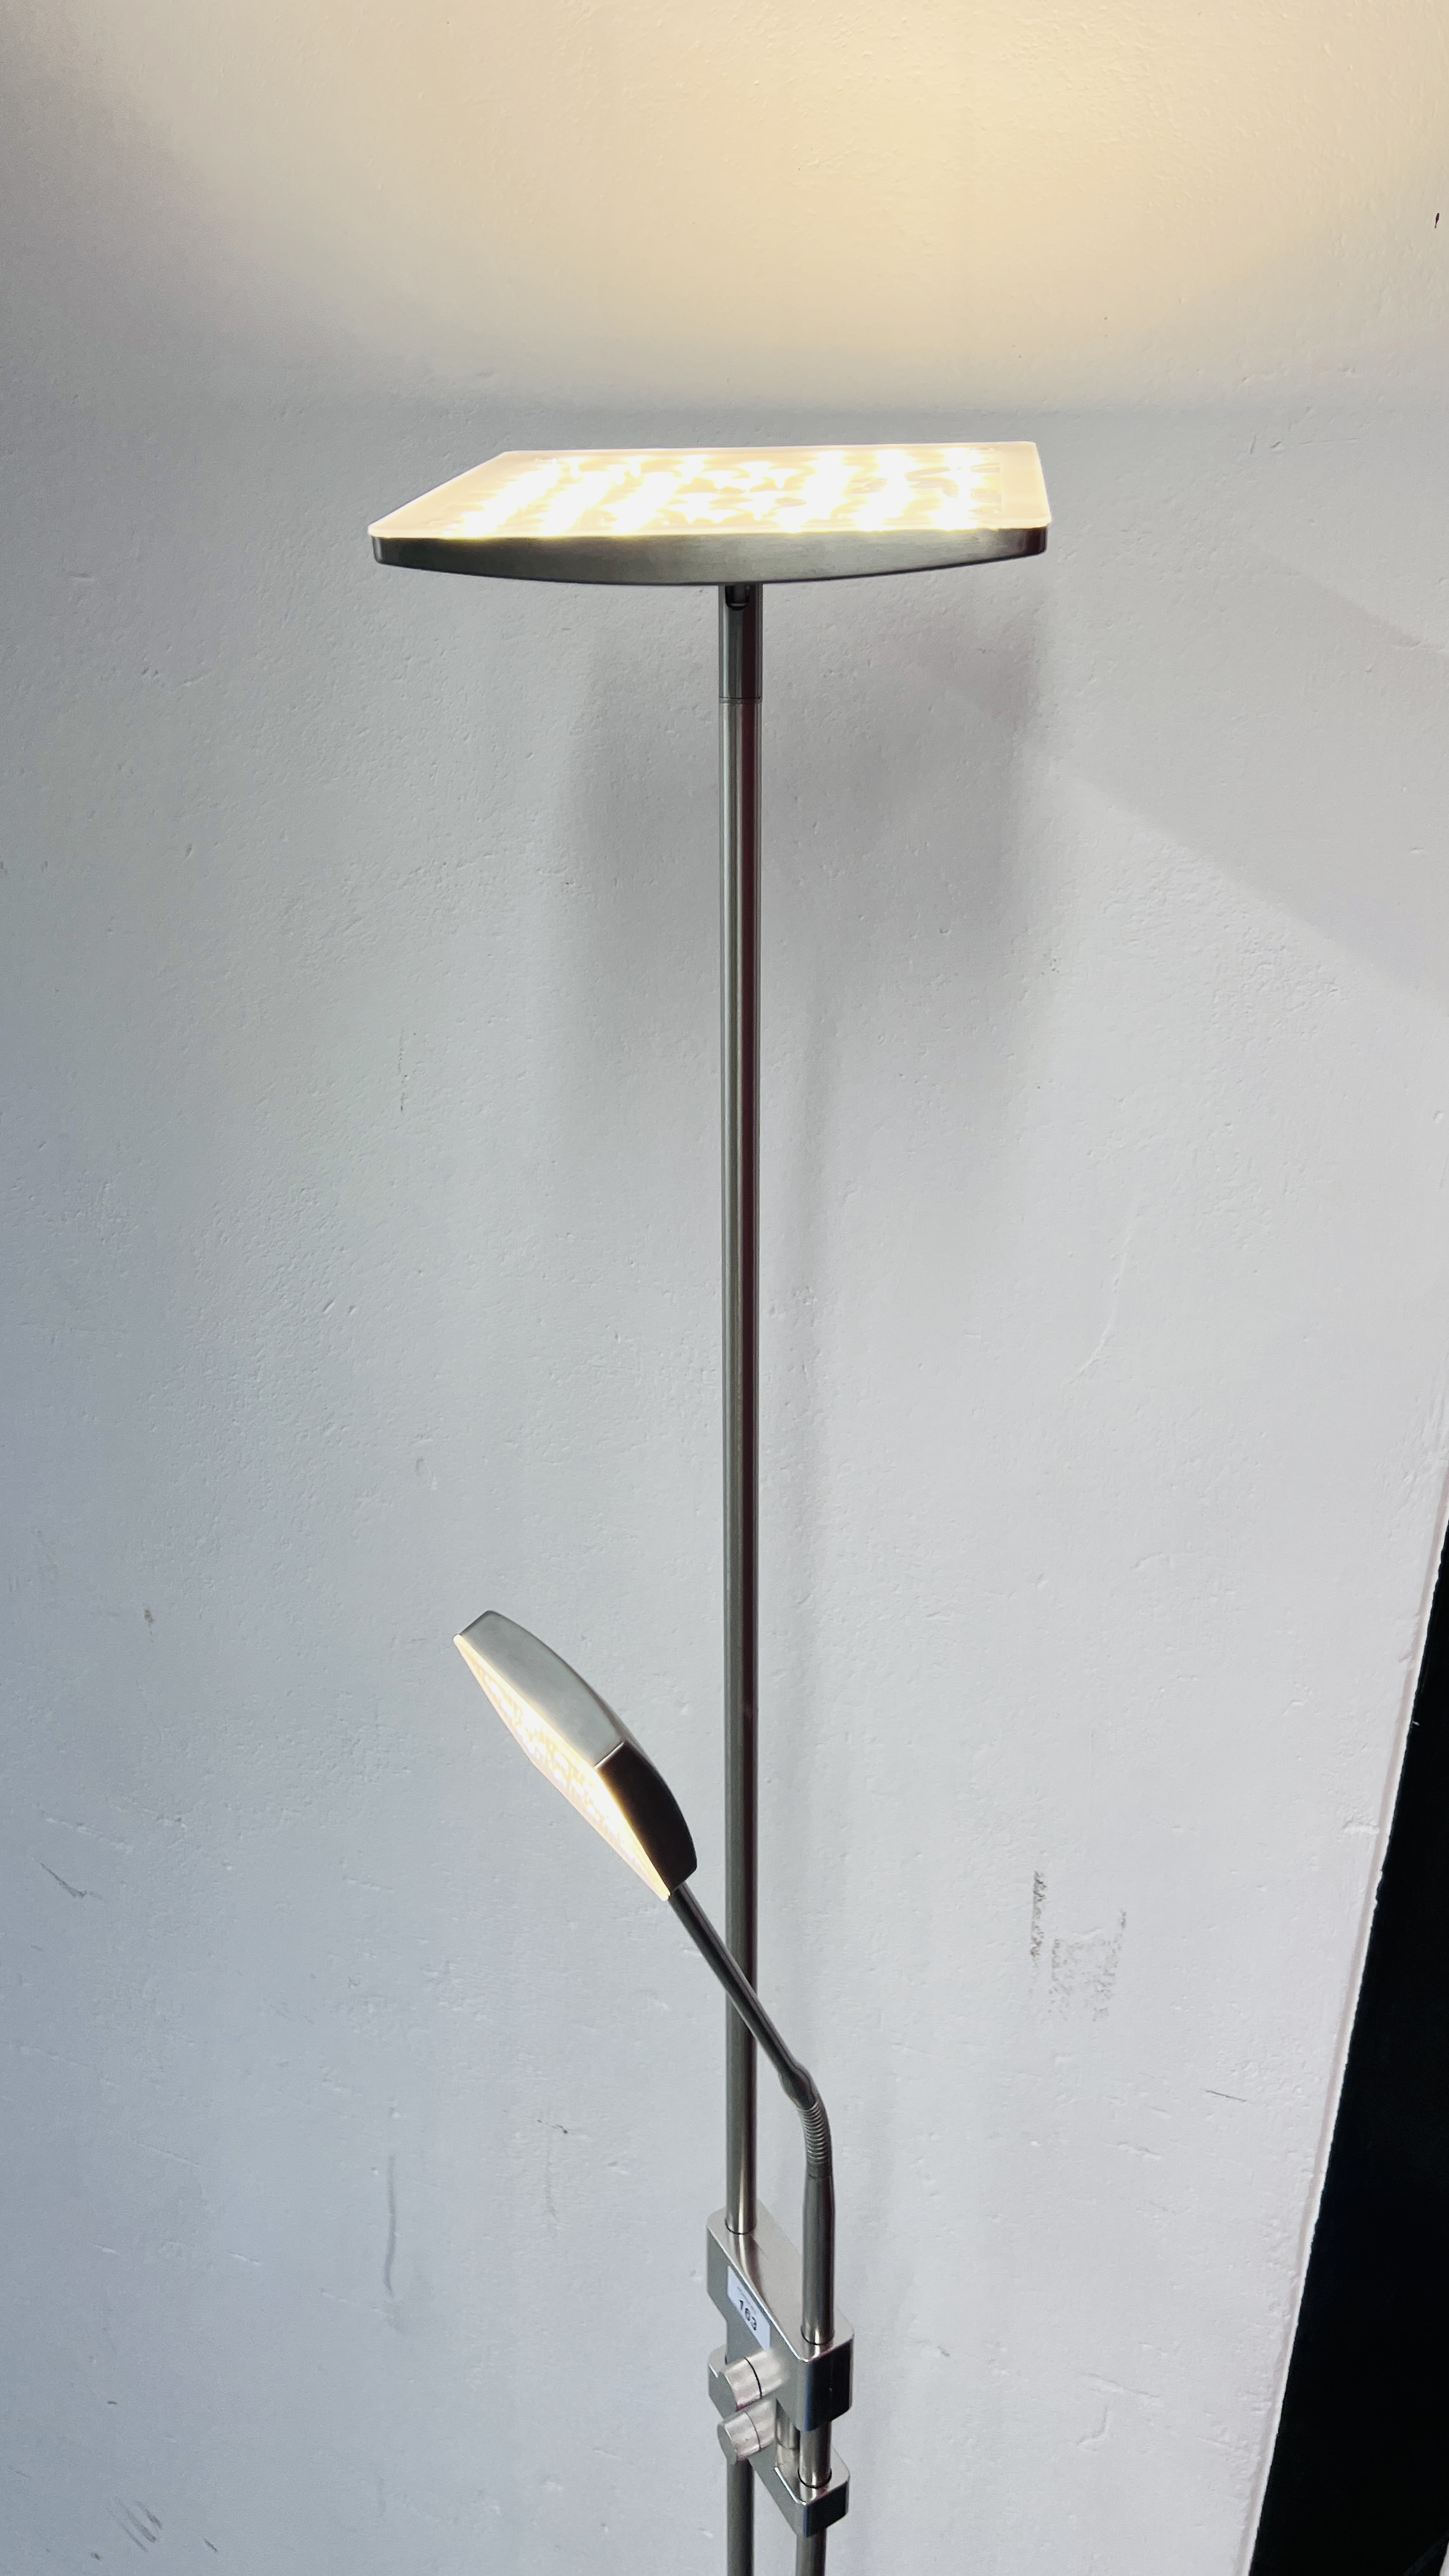 A MODERN STAINLESS STEEL FINISH ANGLE POISE LED LAMP WITH READING LIGHT - SOLD AS SEEN. - Image 11 of 11